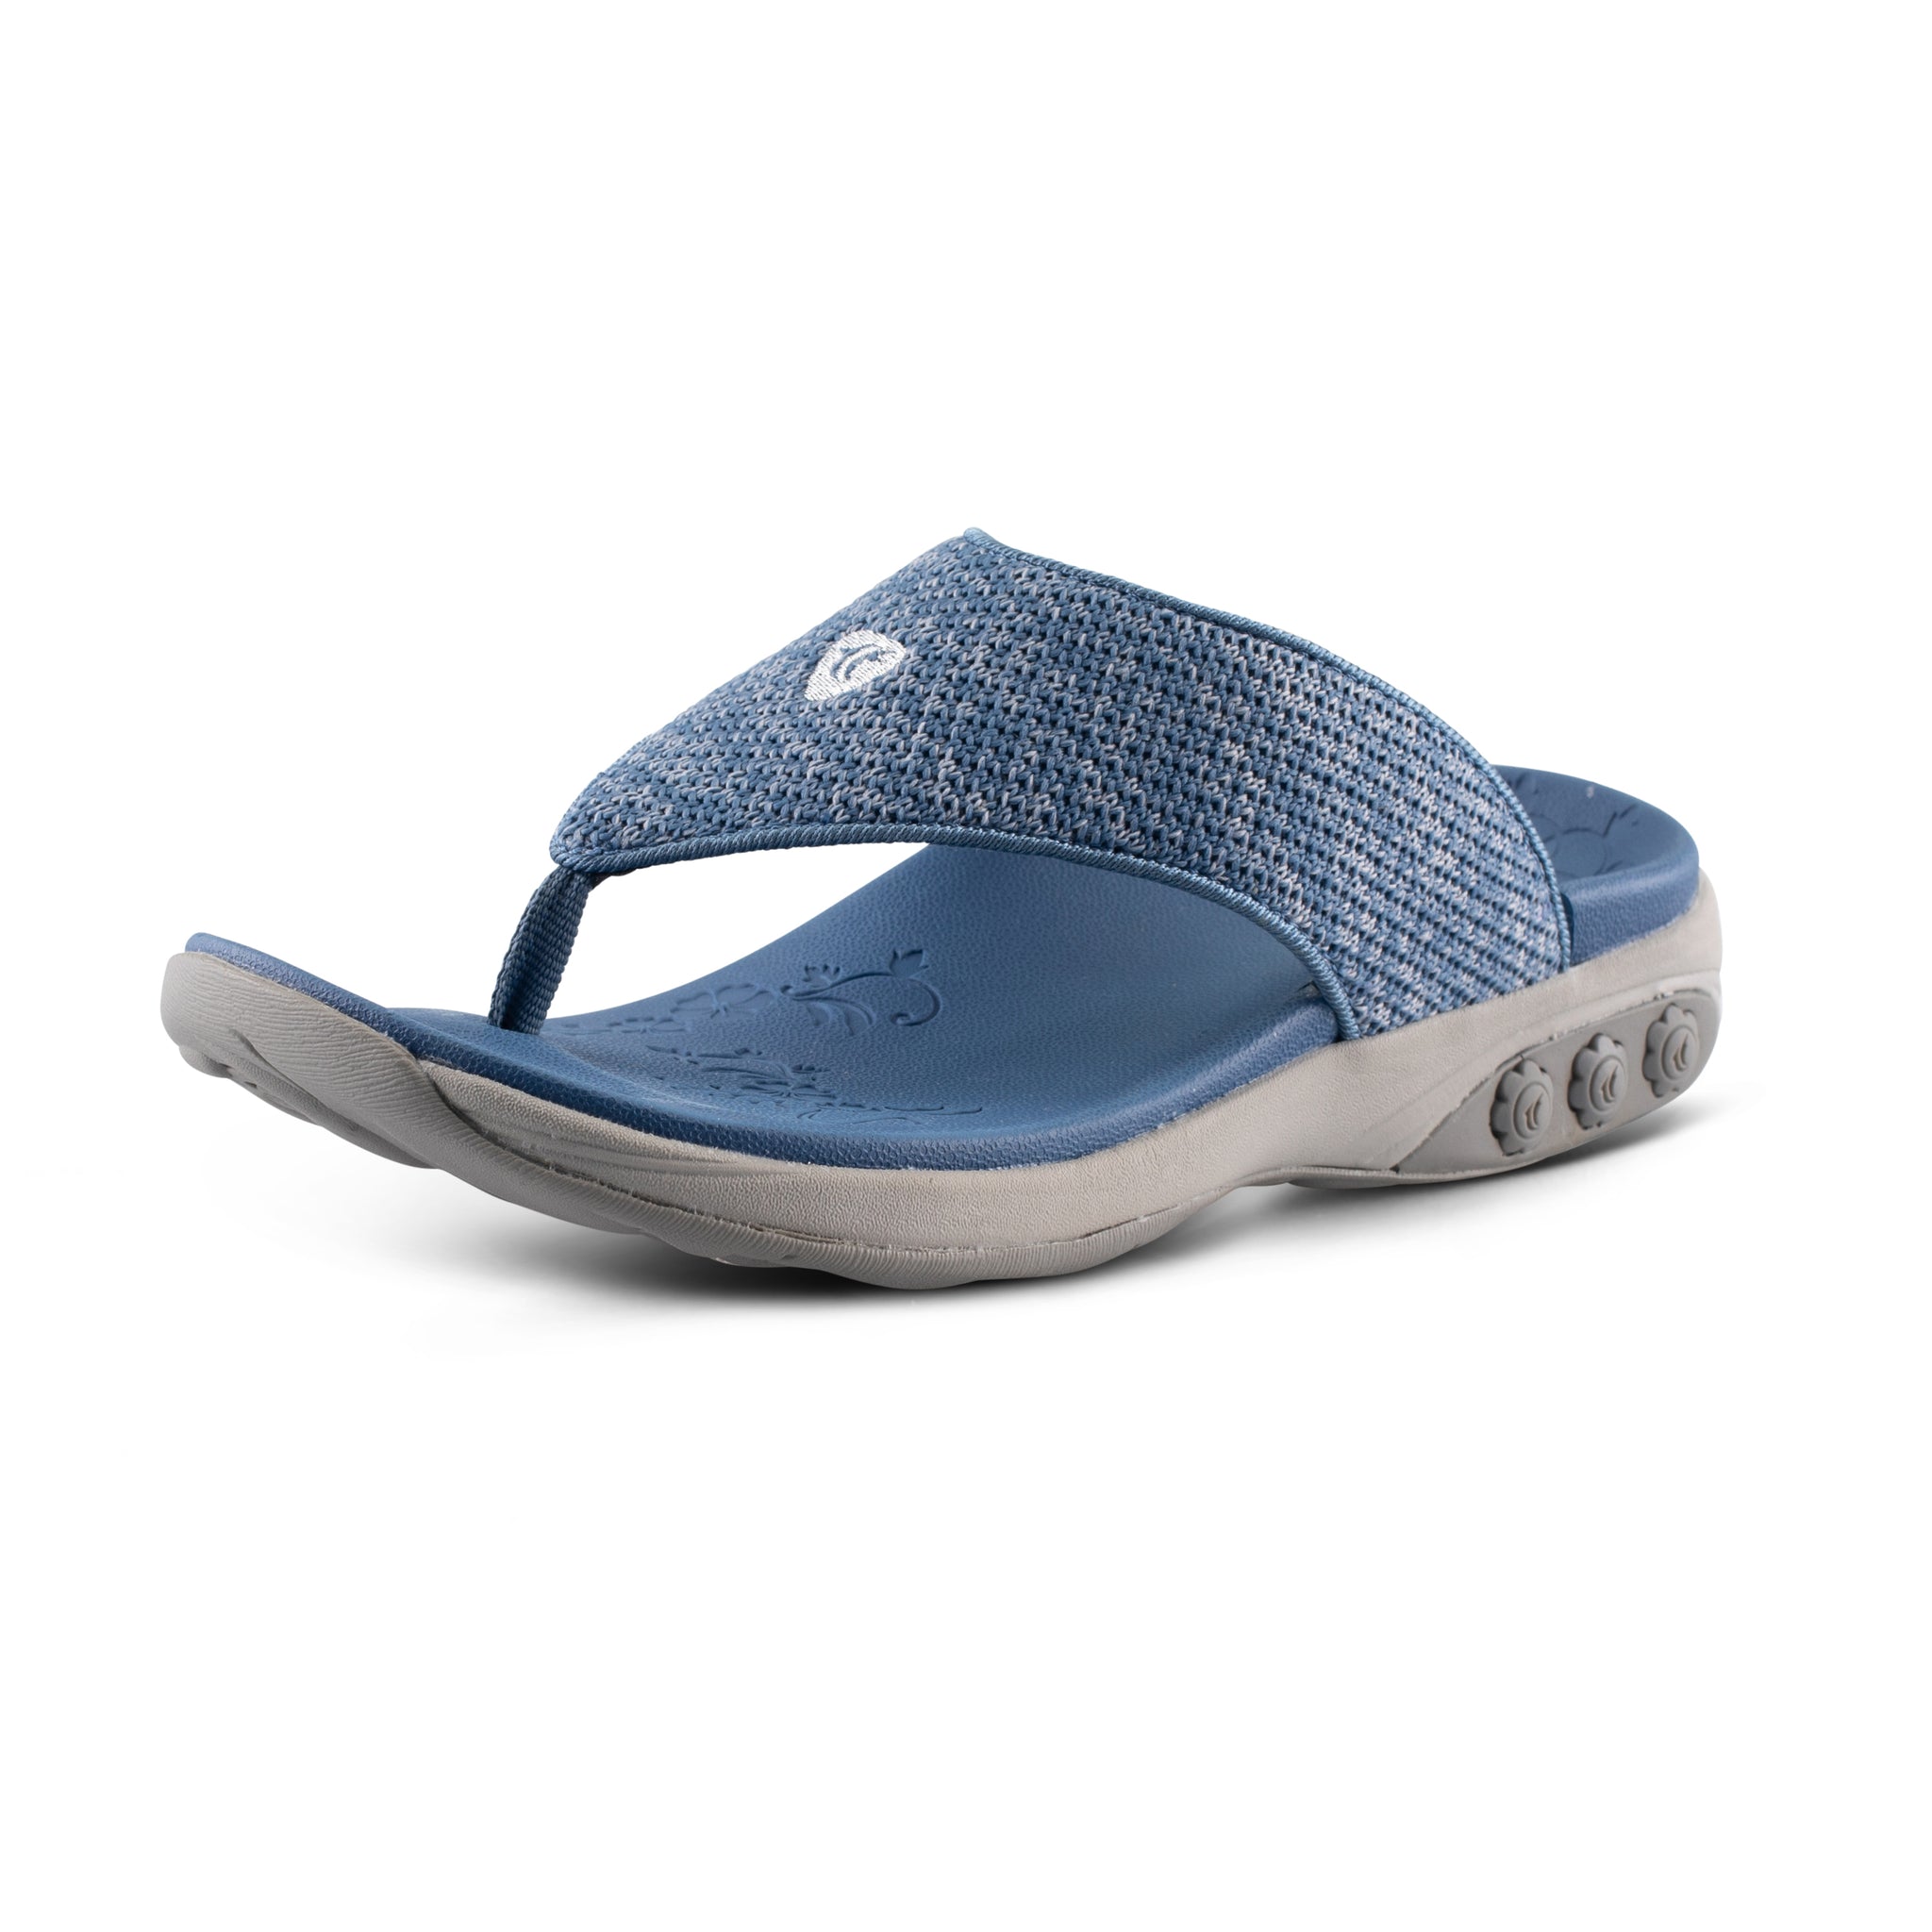 Therafit Maui Women's Arch Support Sandal